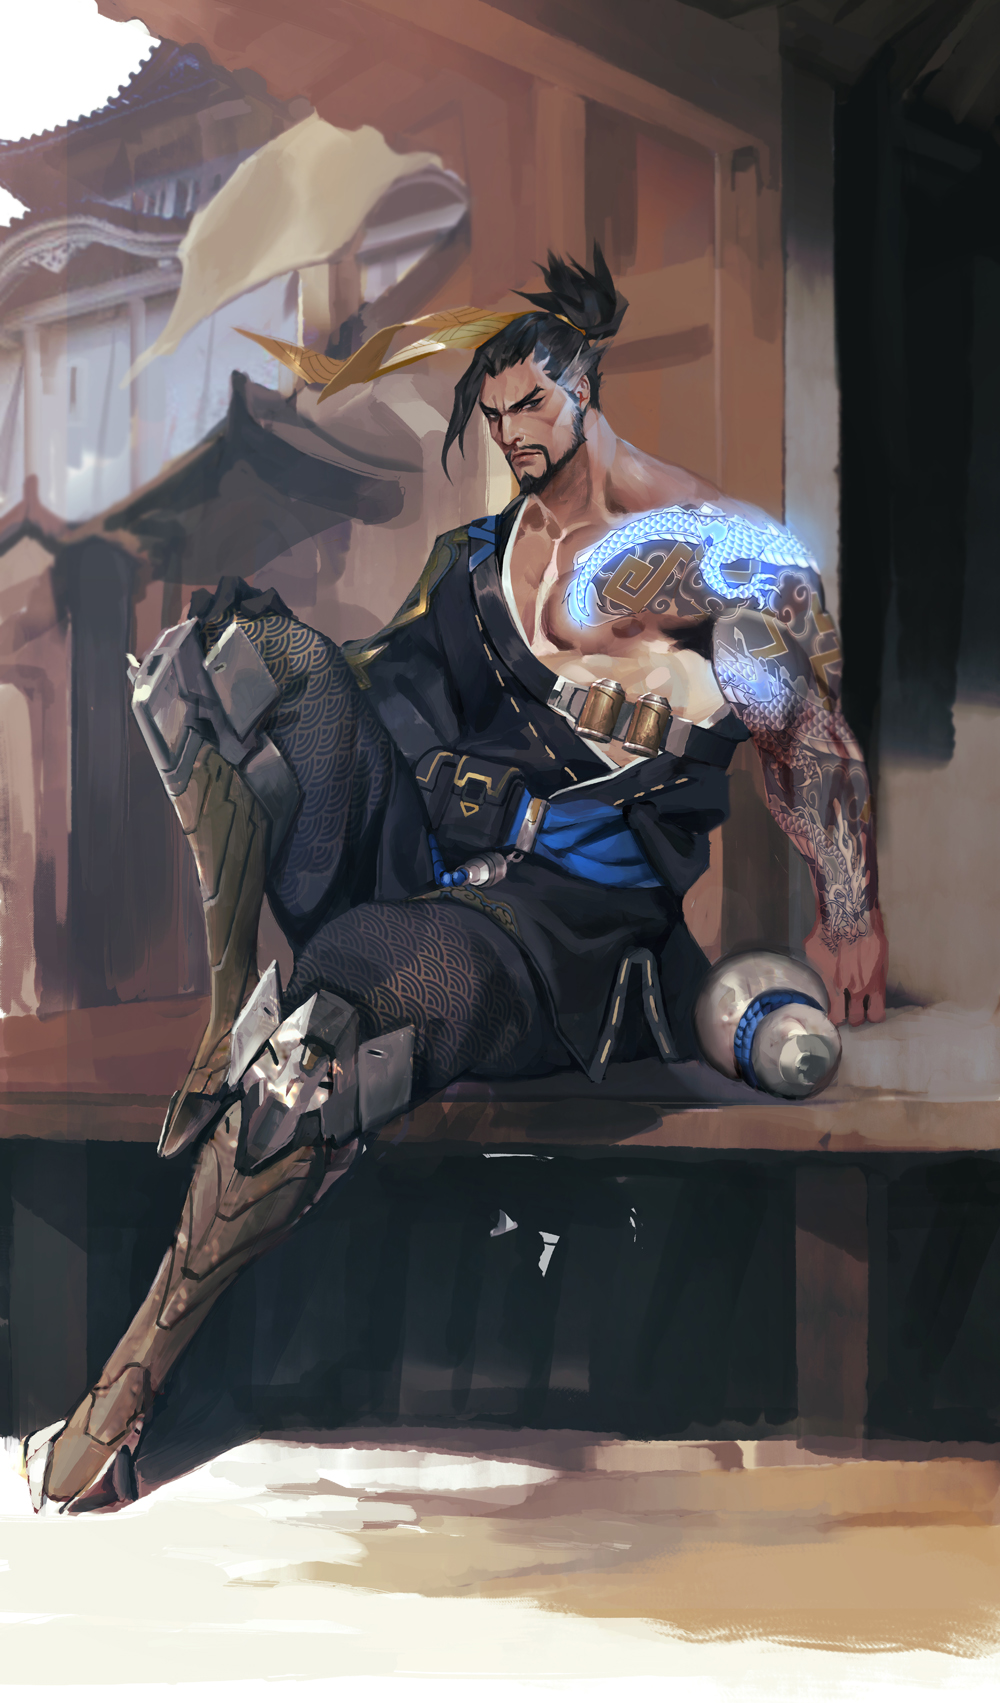 Overwatch Art by Kim Tae Kyeong